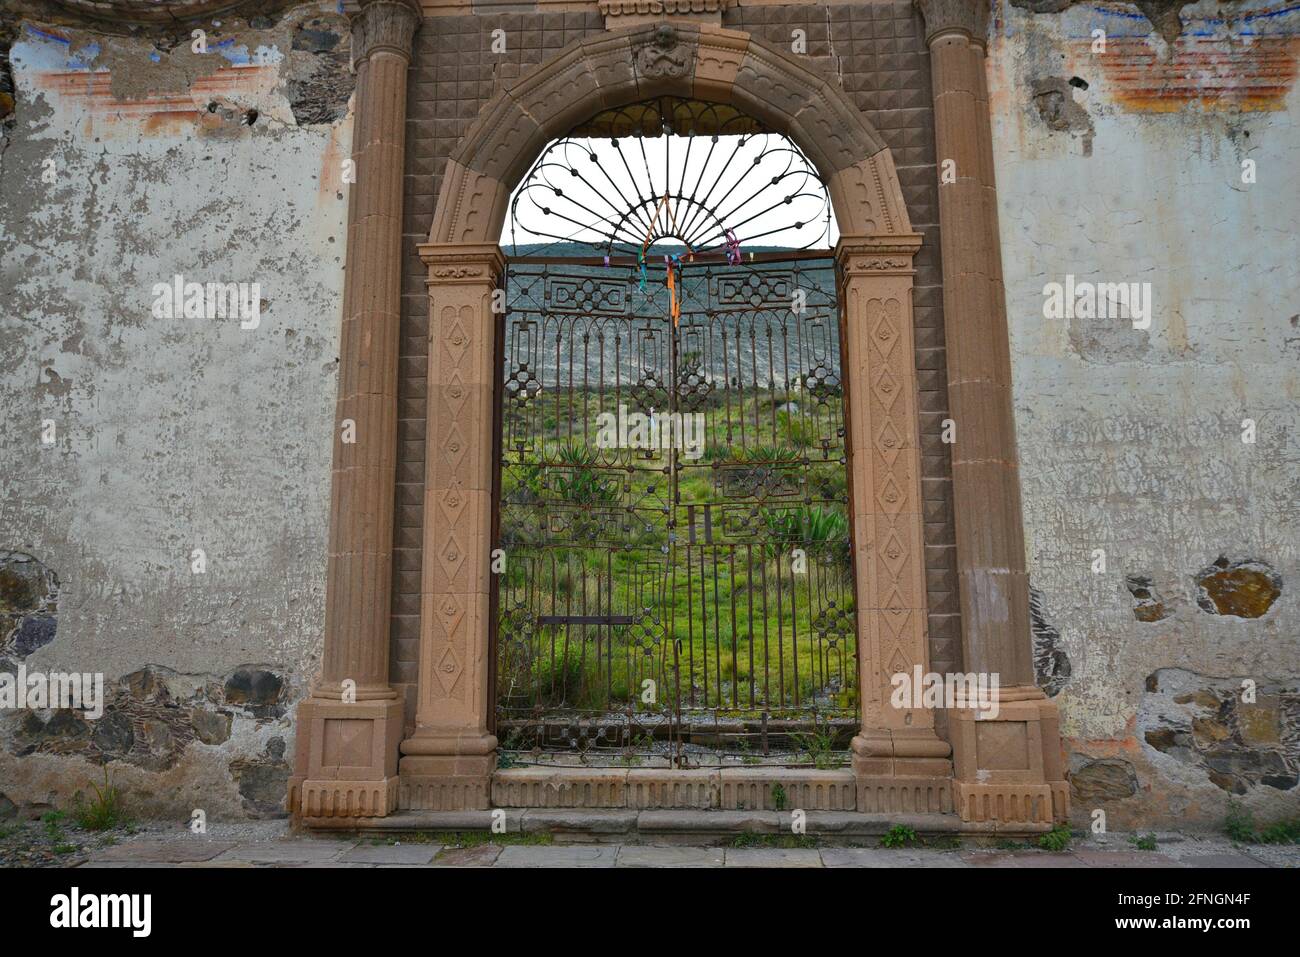 Scenic landscape with view of El Paredón arched stone entrance on the exterior of Plaza de Toros in Real de Catorce, Mexico. Stock Photo